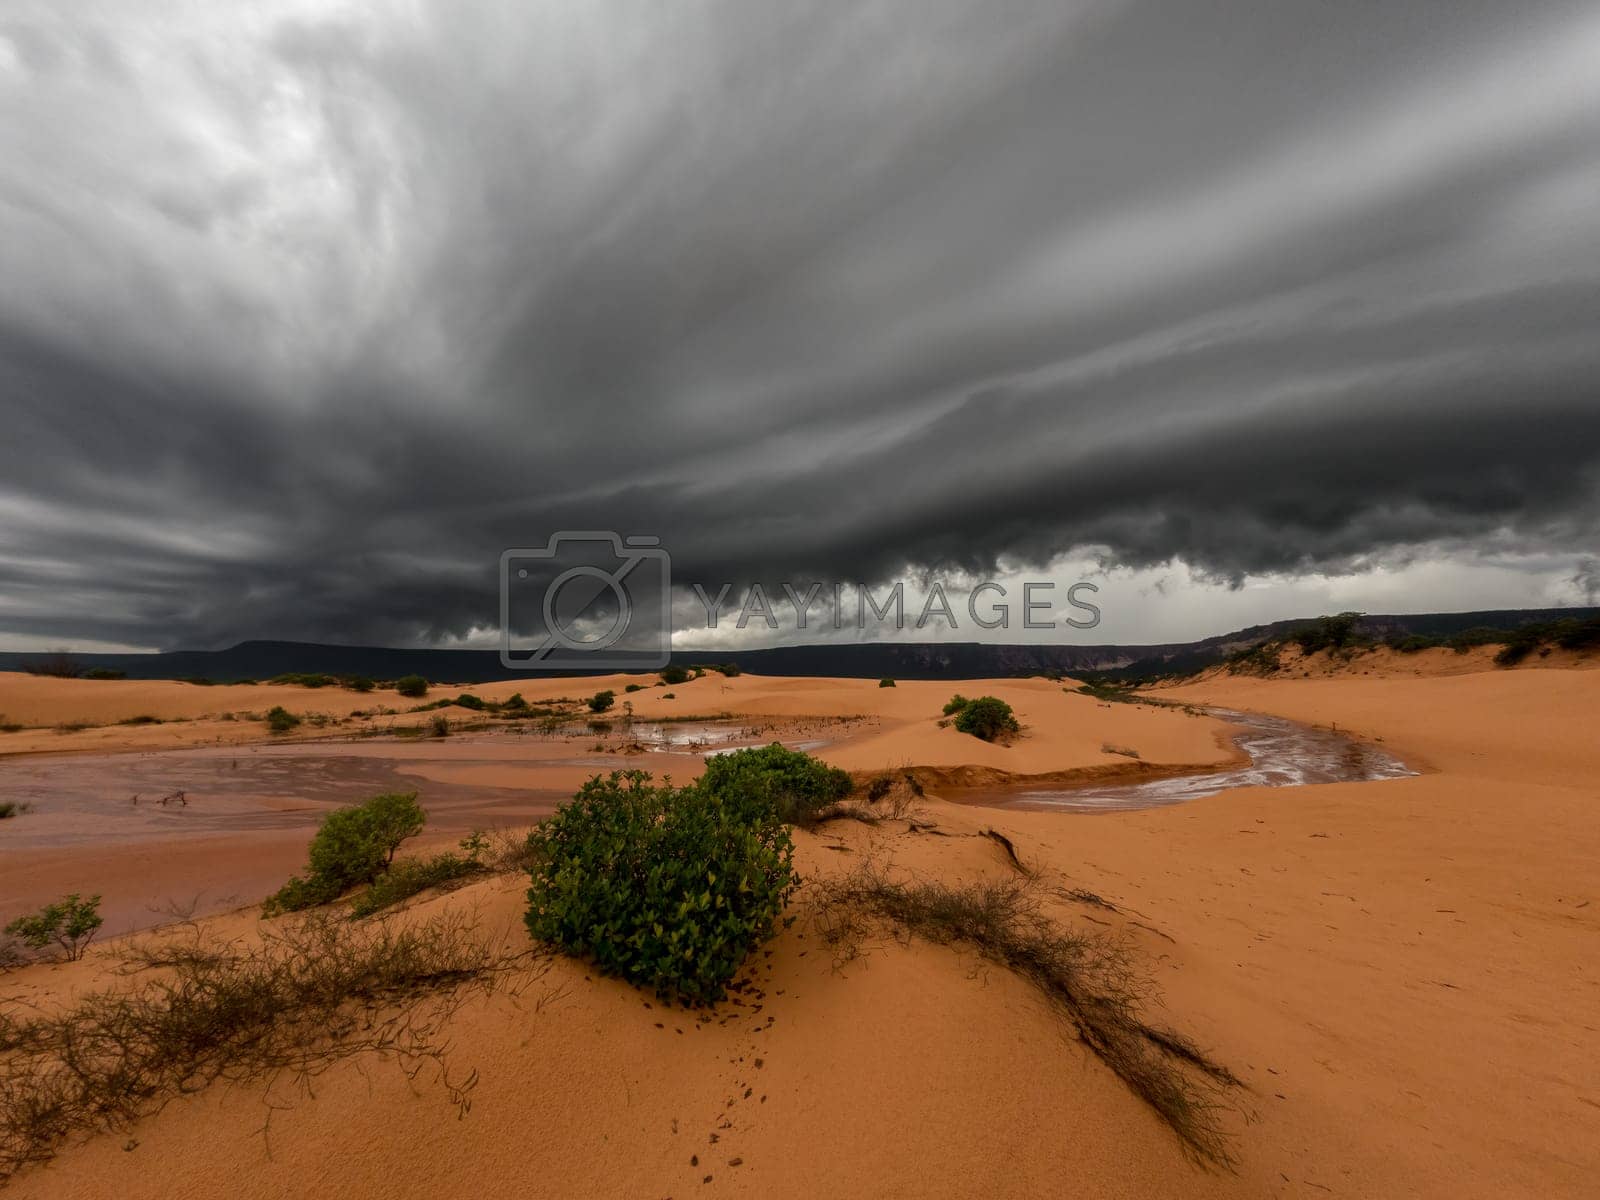 Royalty free image of Spectacular storm over Jalapao sand dunes by FerradalFCG